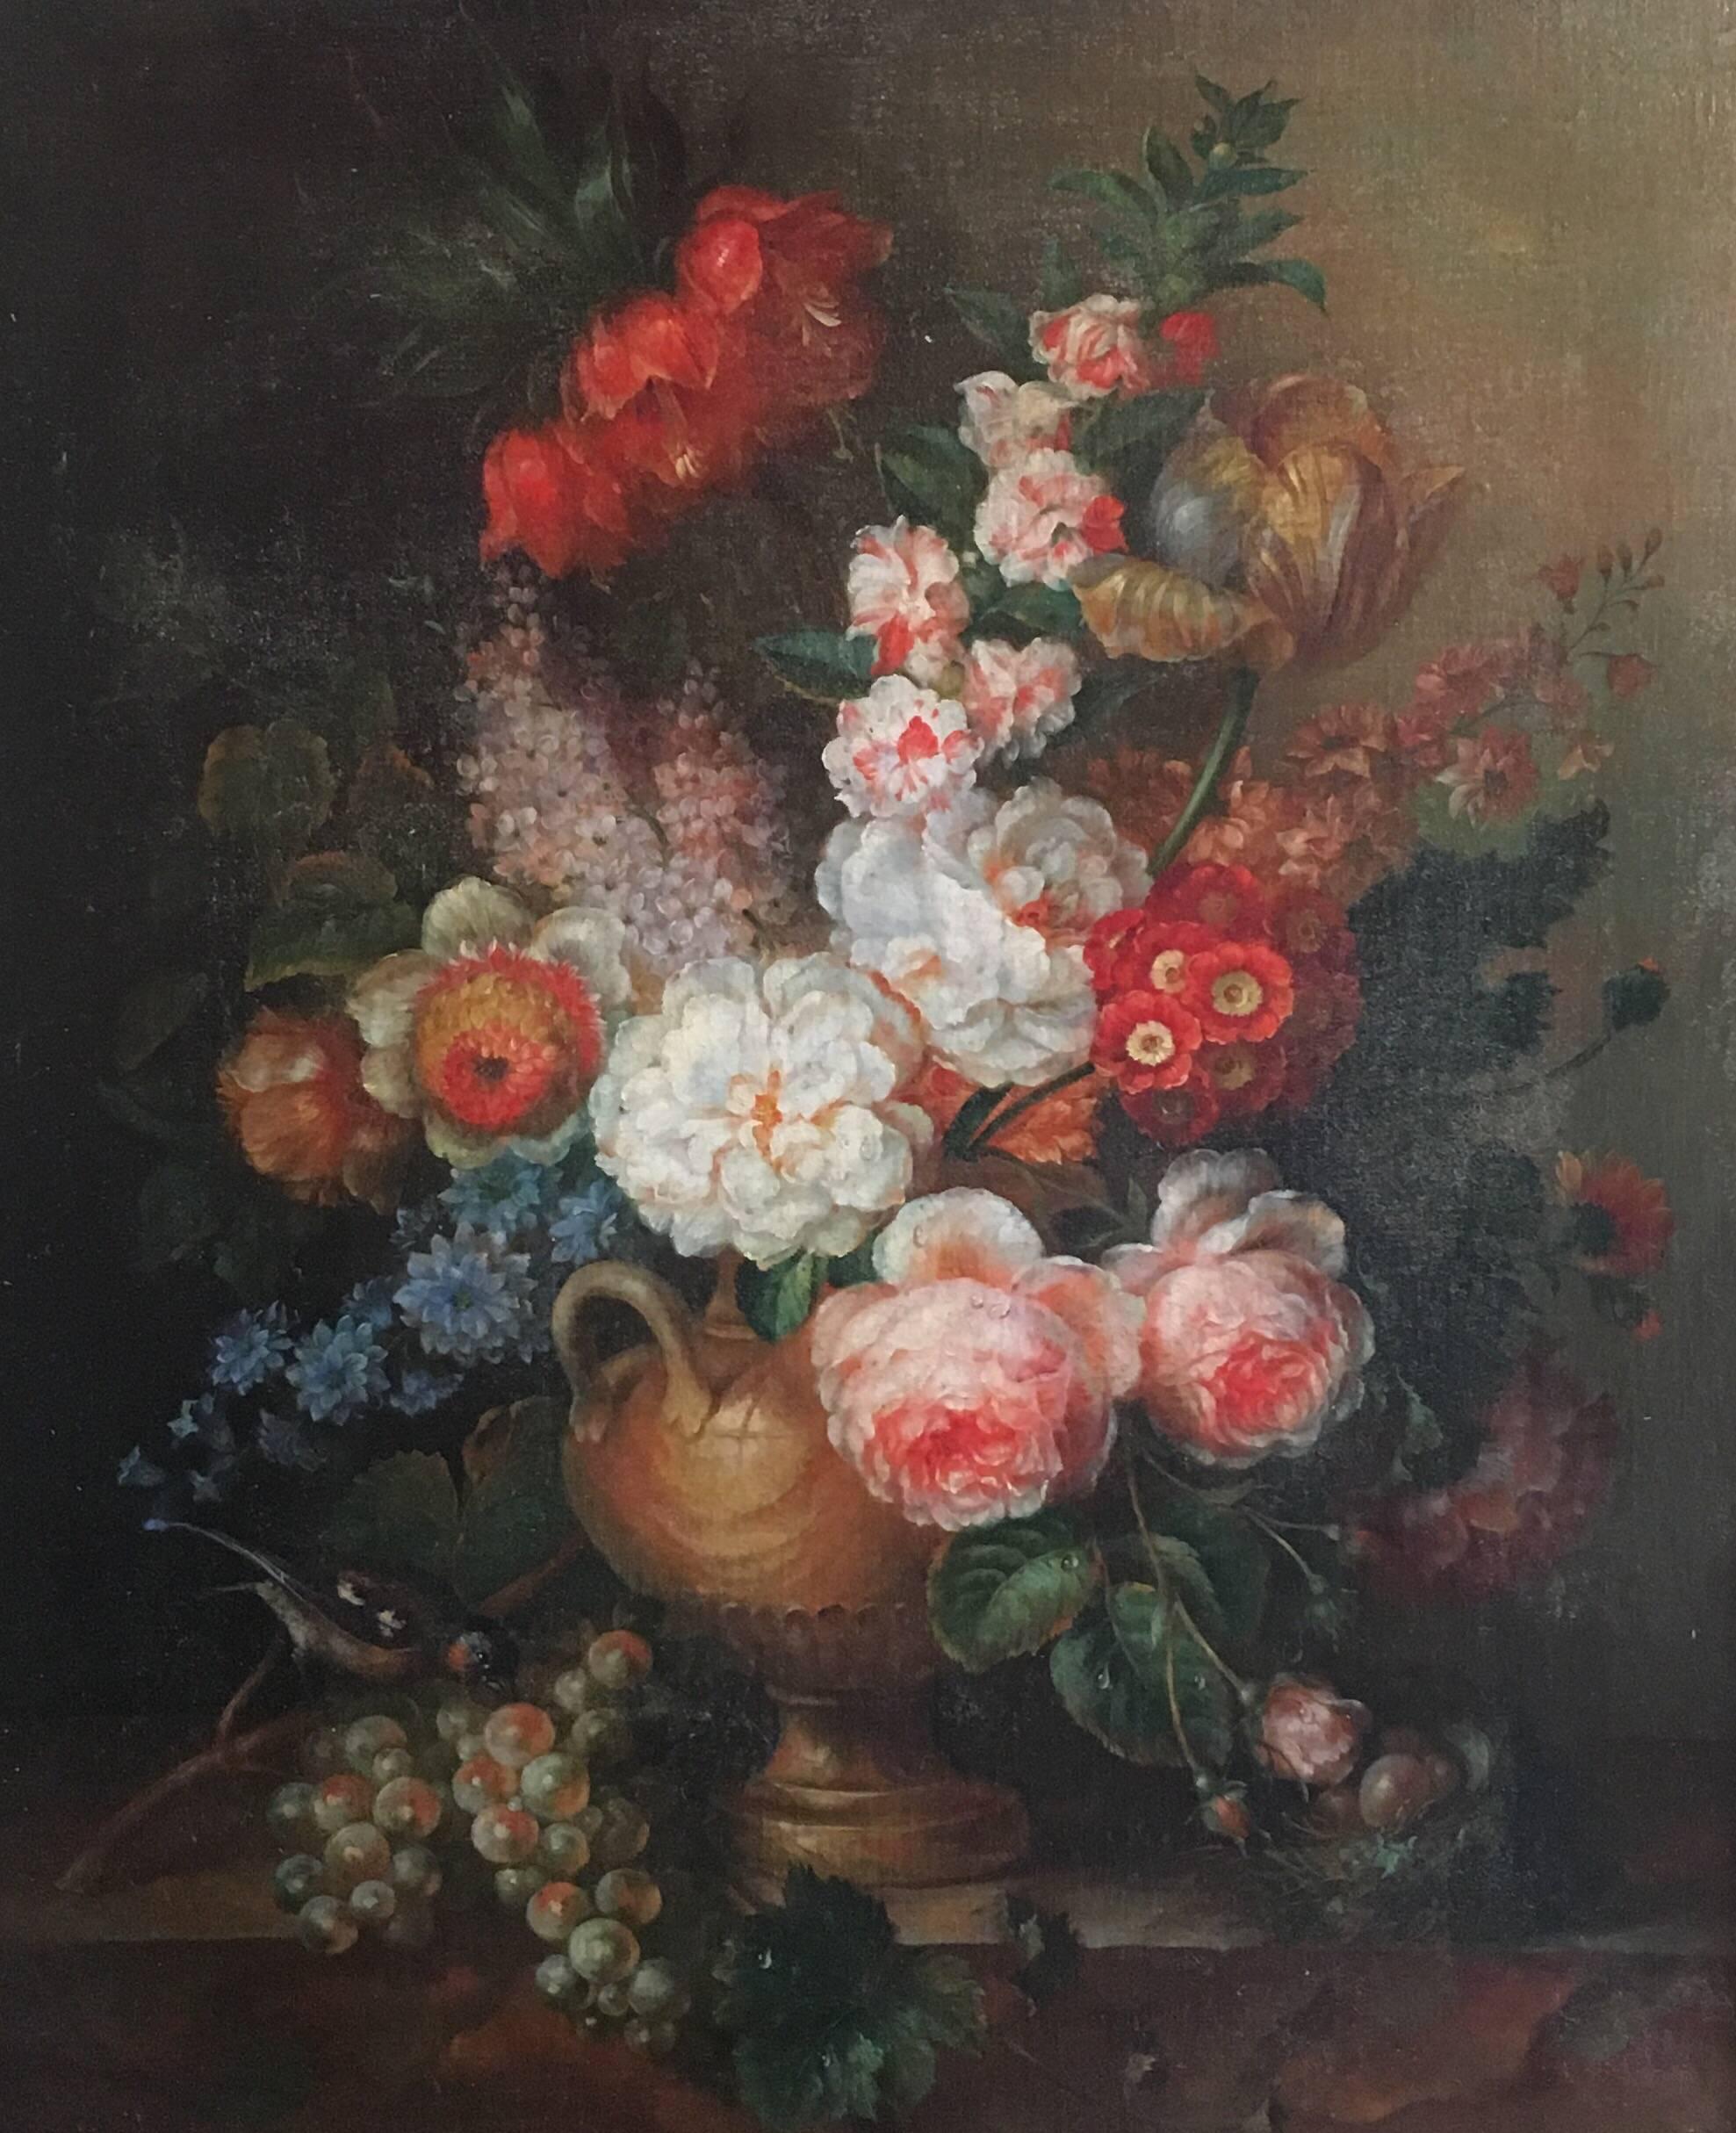 Unknown Interior Painting - Classical Still Life Floral Display Oil Painting - Large Size